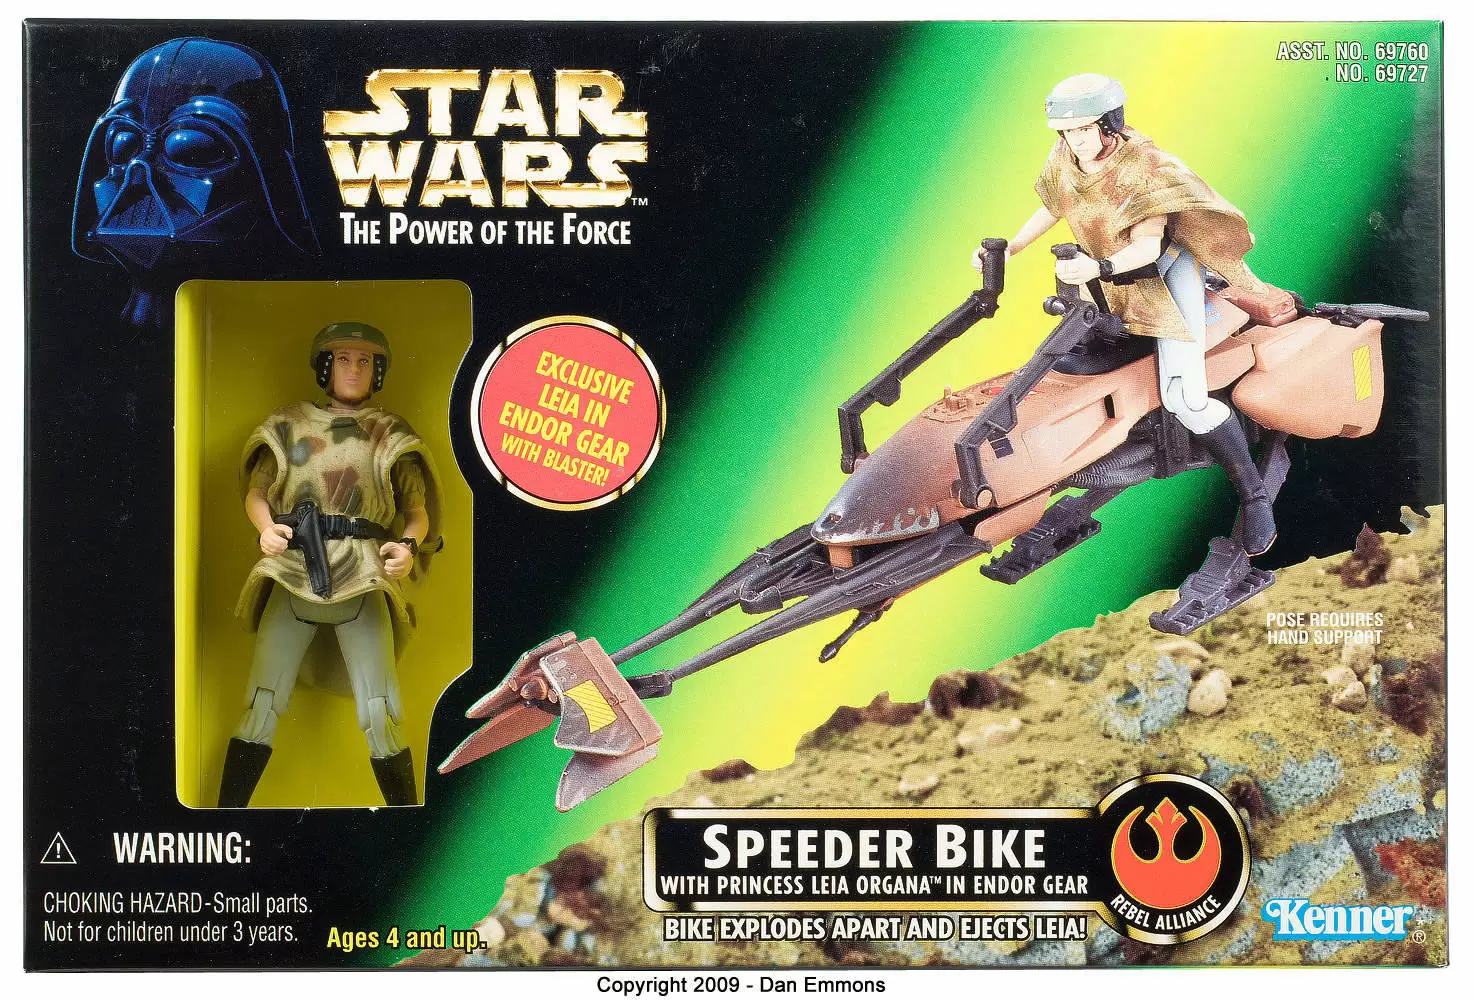 Power of the Force 2 - Speeder Bike with Princess Leia Organa in Endor Gear